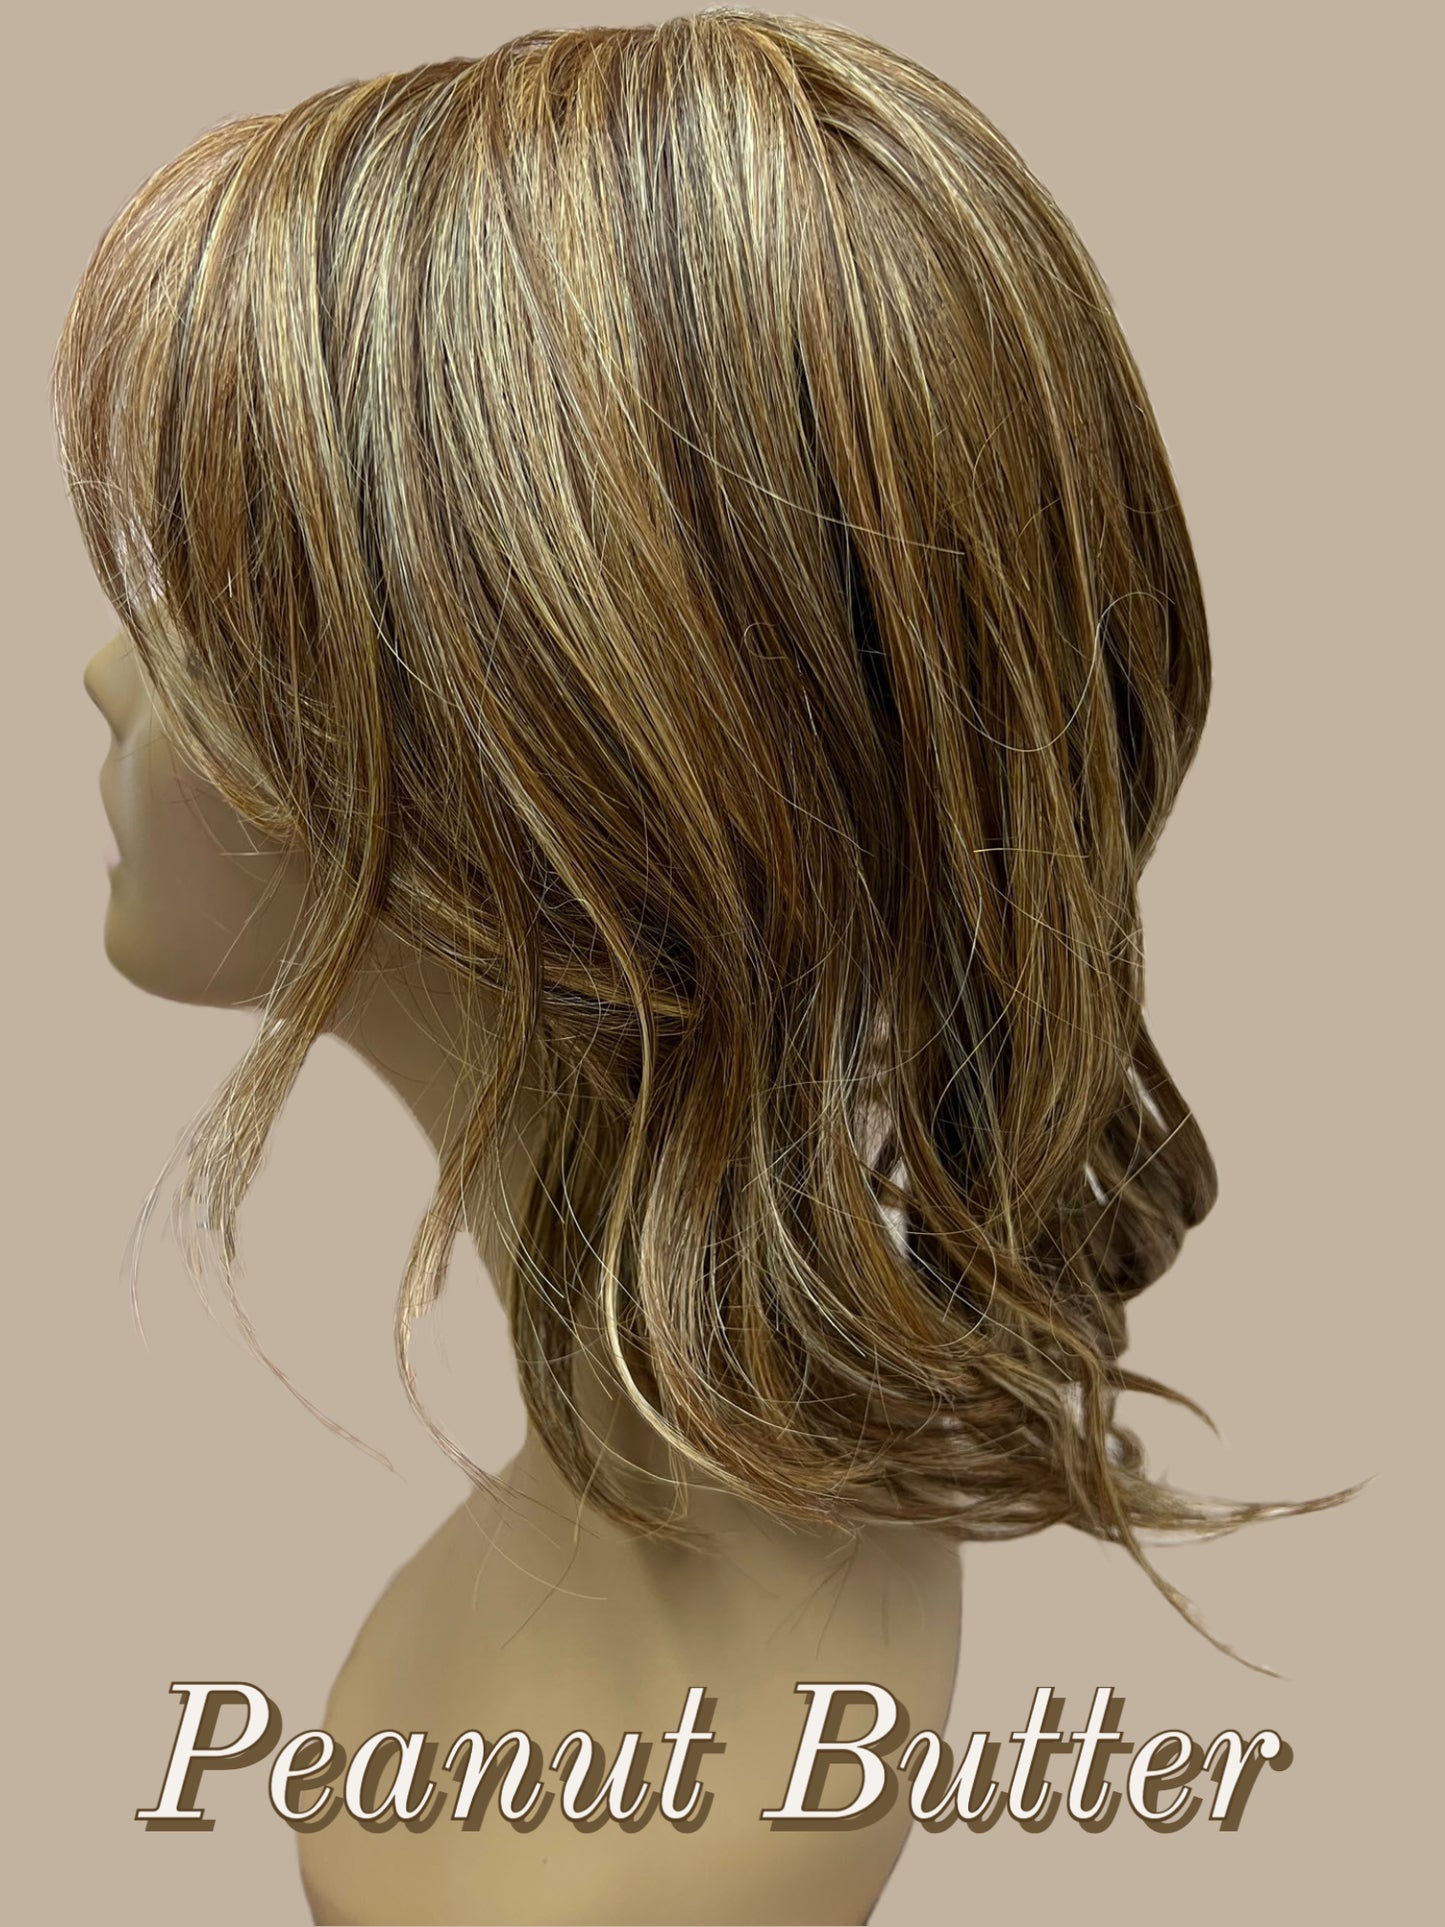 16 inch Topper Beach Wave Bangs LACE FRONT - 40% OFF THIS PRICE NO CODE NEEDED - FINAL SALE